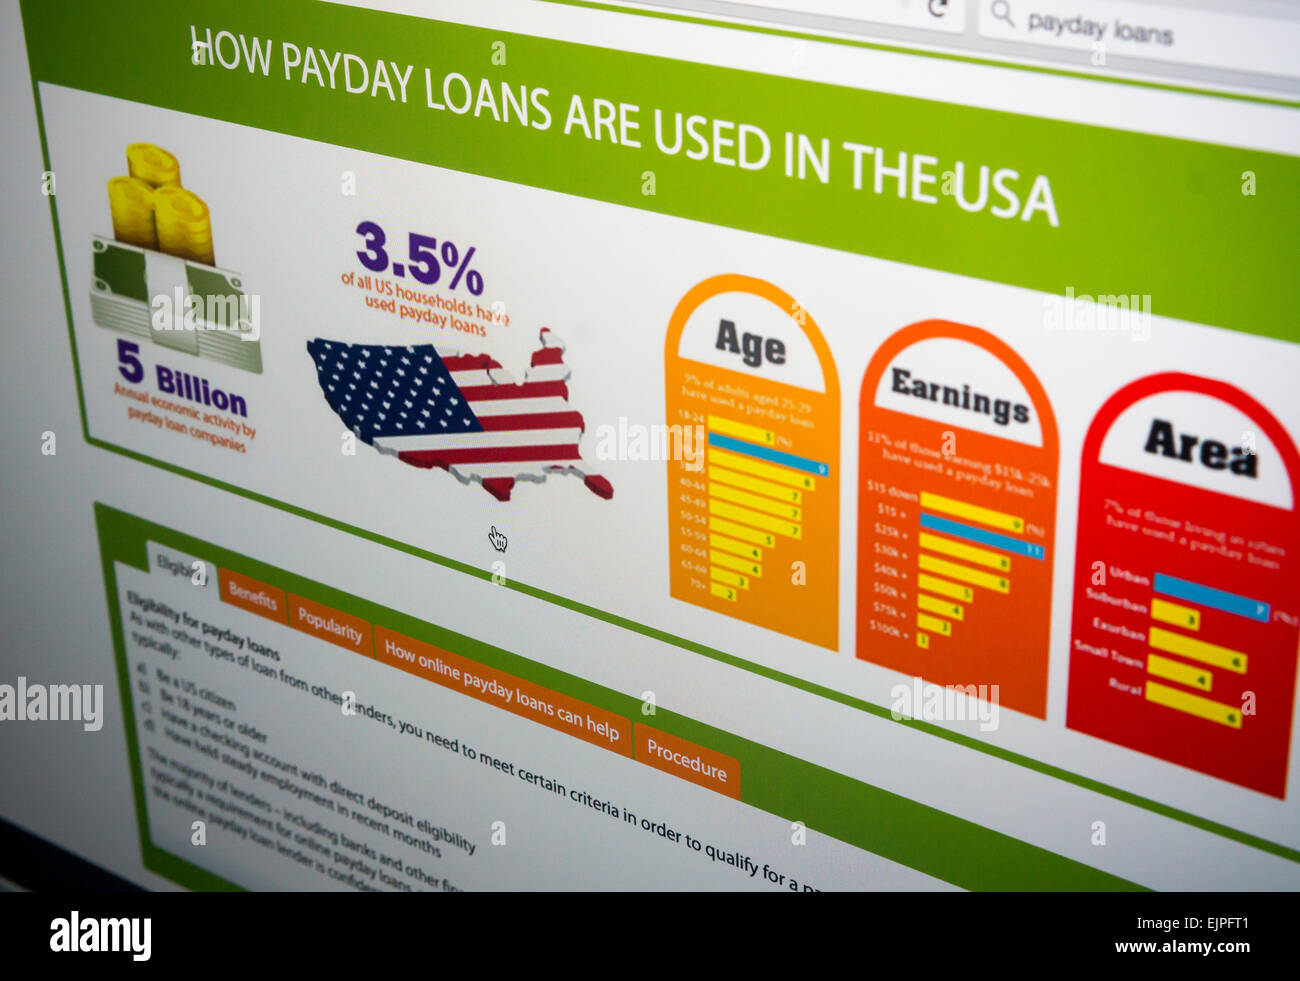 A website promoting their payday loan services is seen on Thursday, March 26, 2015. The U.S. Consumer Financial Protection Bureau has announced plans for regulations to crack down on payday loans which have the potential to trap consumers in an endless cycle of debt. Payday loans are short term loans at high interest rates that make it difficult for borrowers to pay back, hence the borrower must refinance the first loan. (© Richard B. Levine) Stock Photo